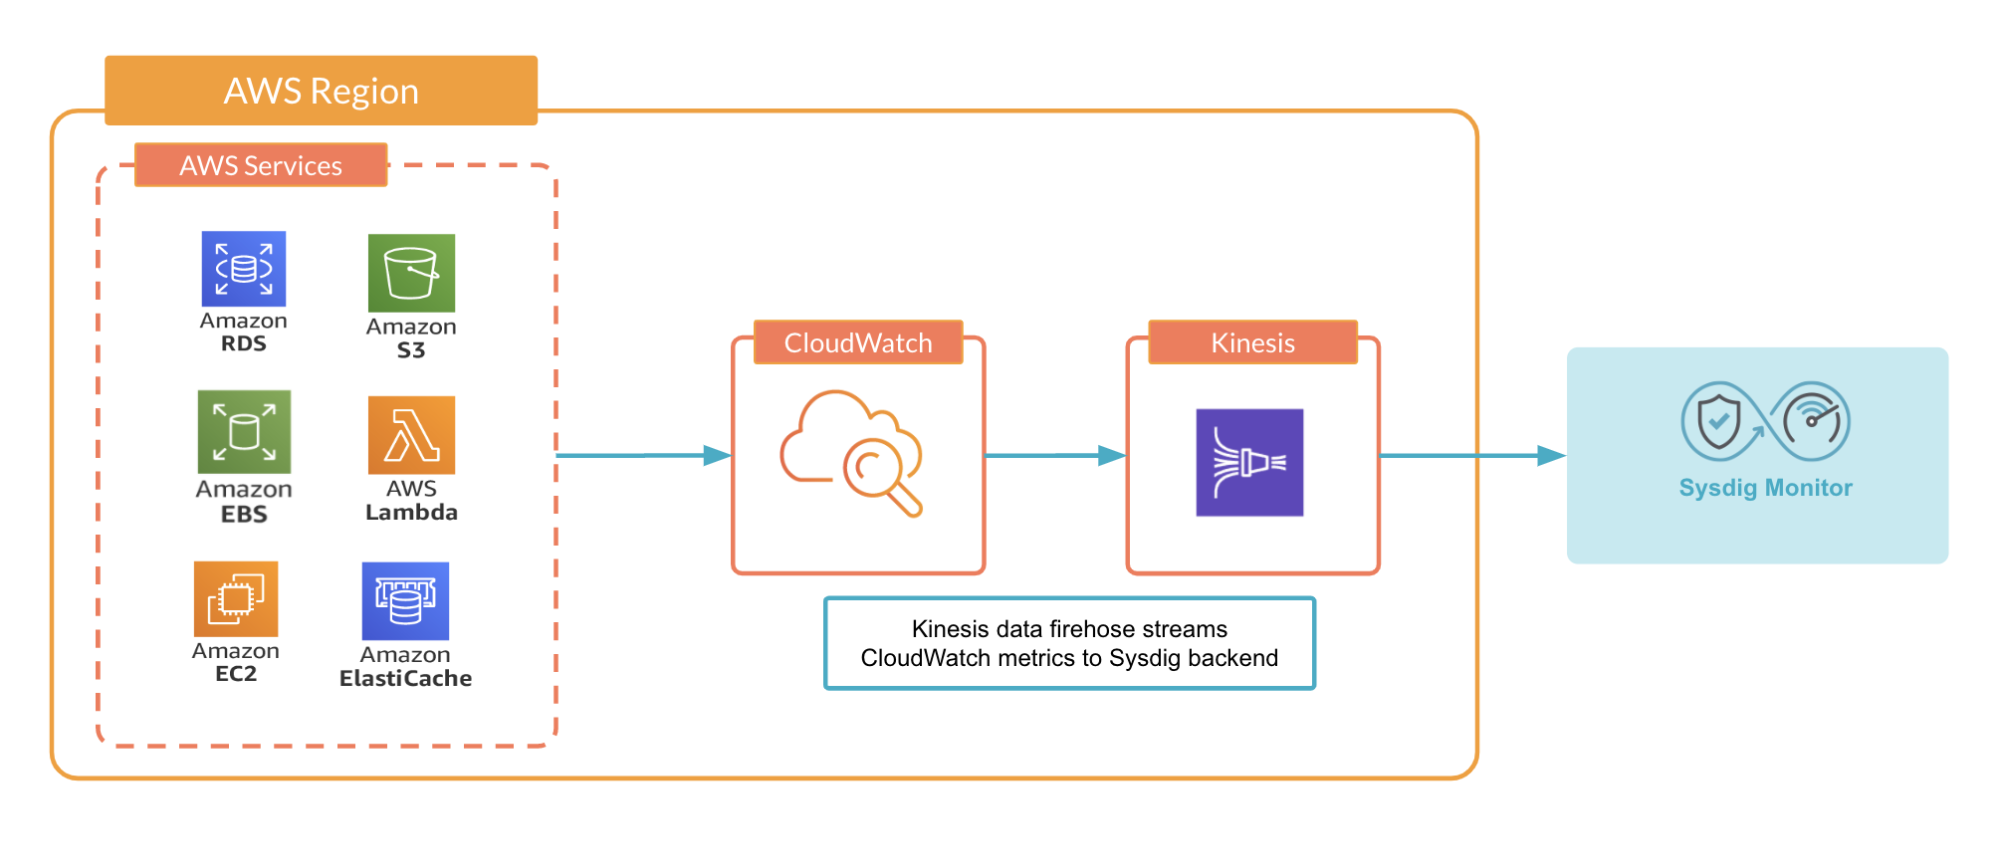 AWS architecture of how ASW Cloudwatch sends metrics to Sysdig monitor via Kinesis